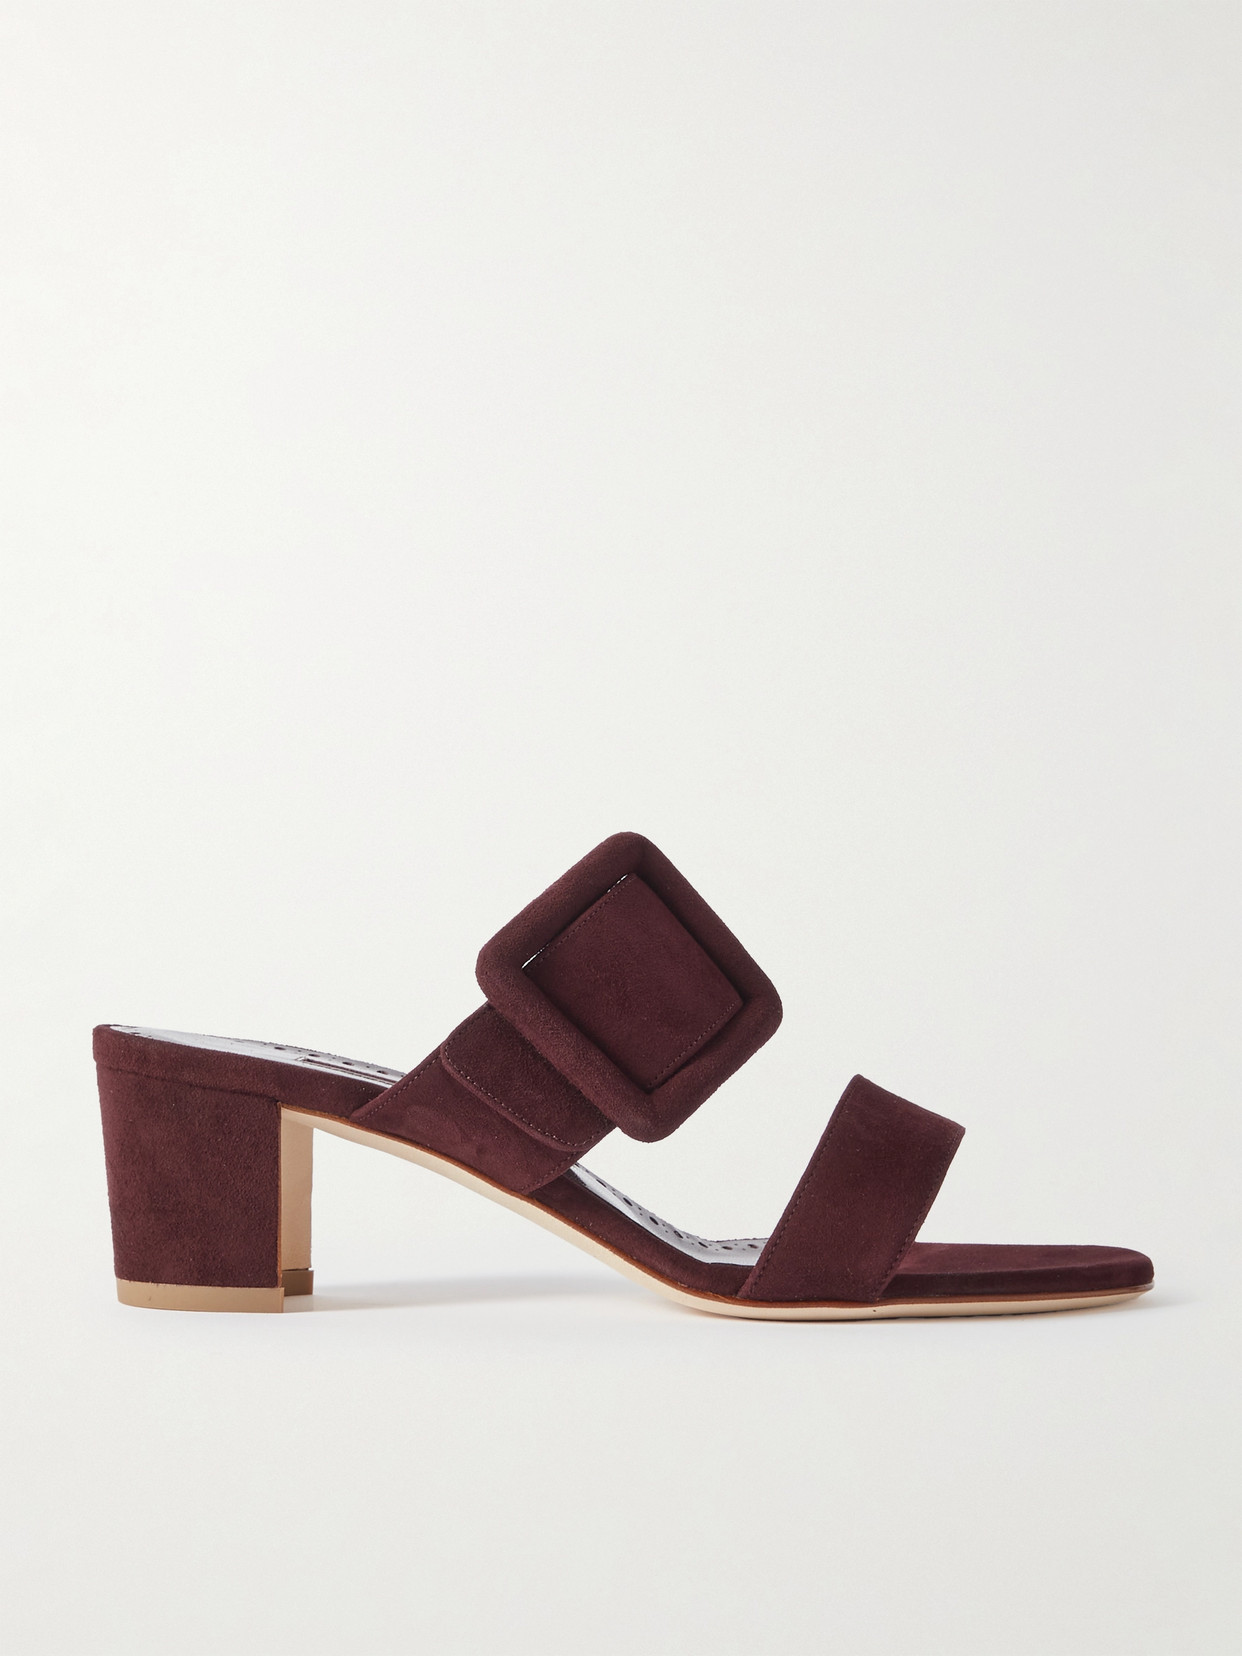 Titubanew 50 Buckled Suede Sandals